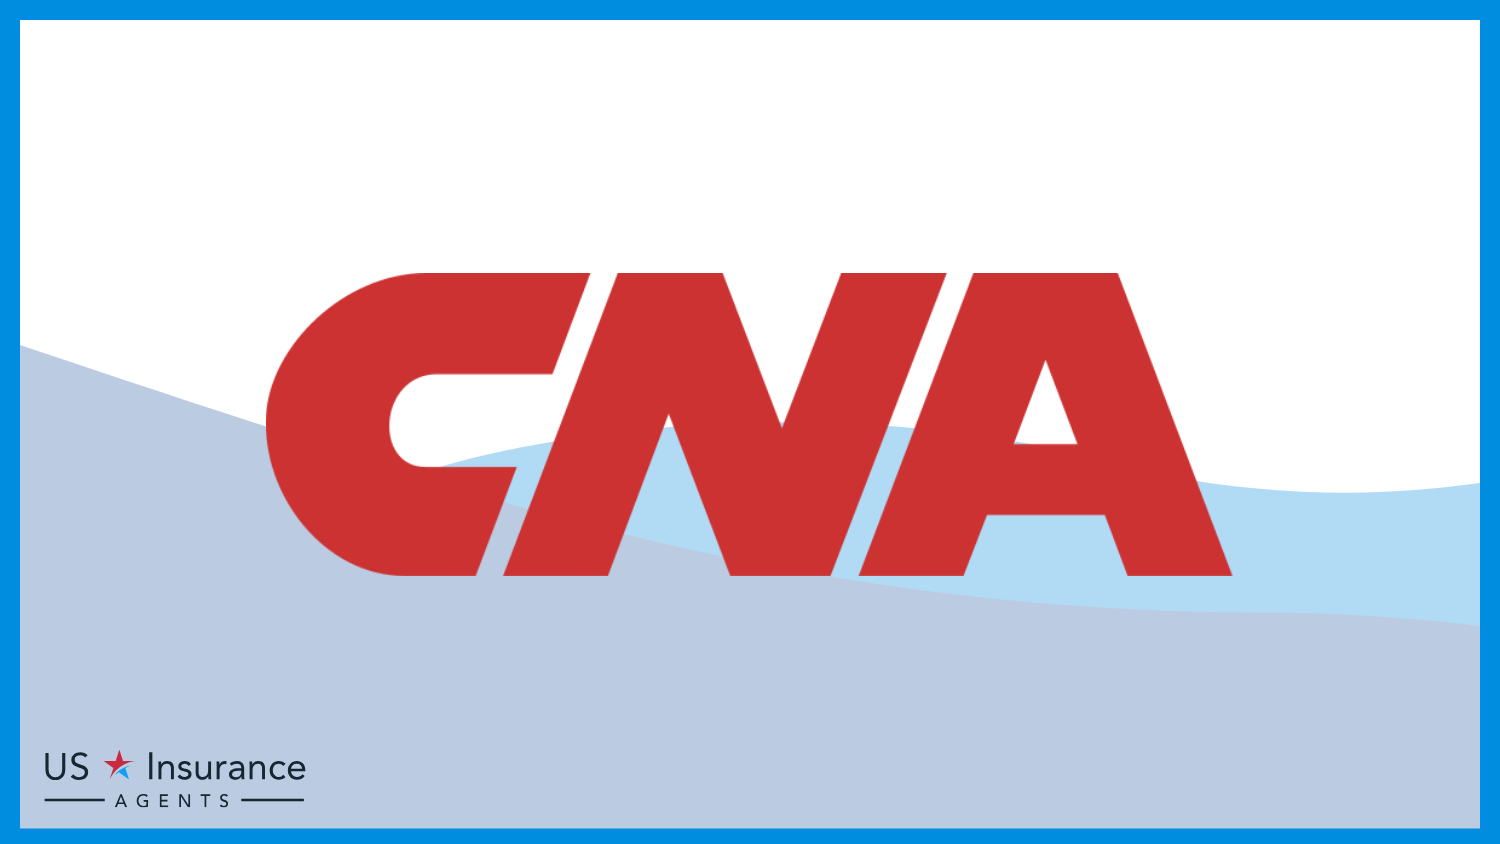 Best Business Insurance for Financial Services: CNA